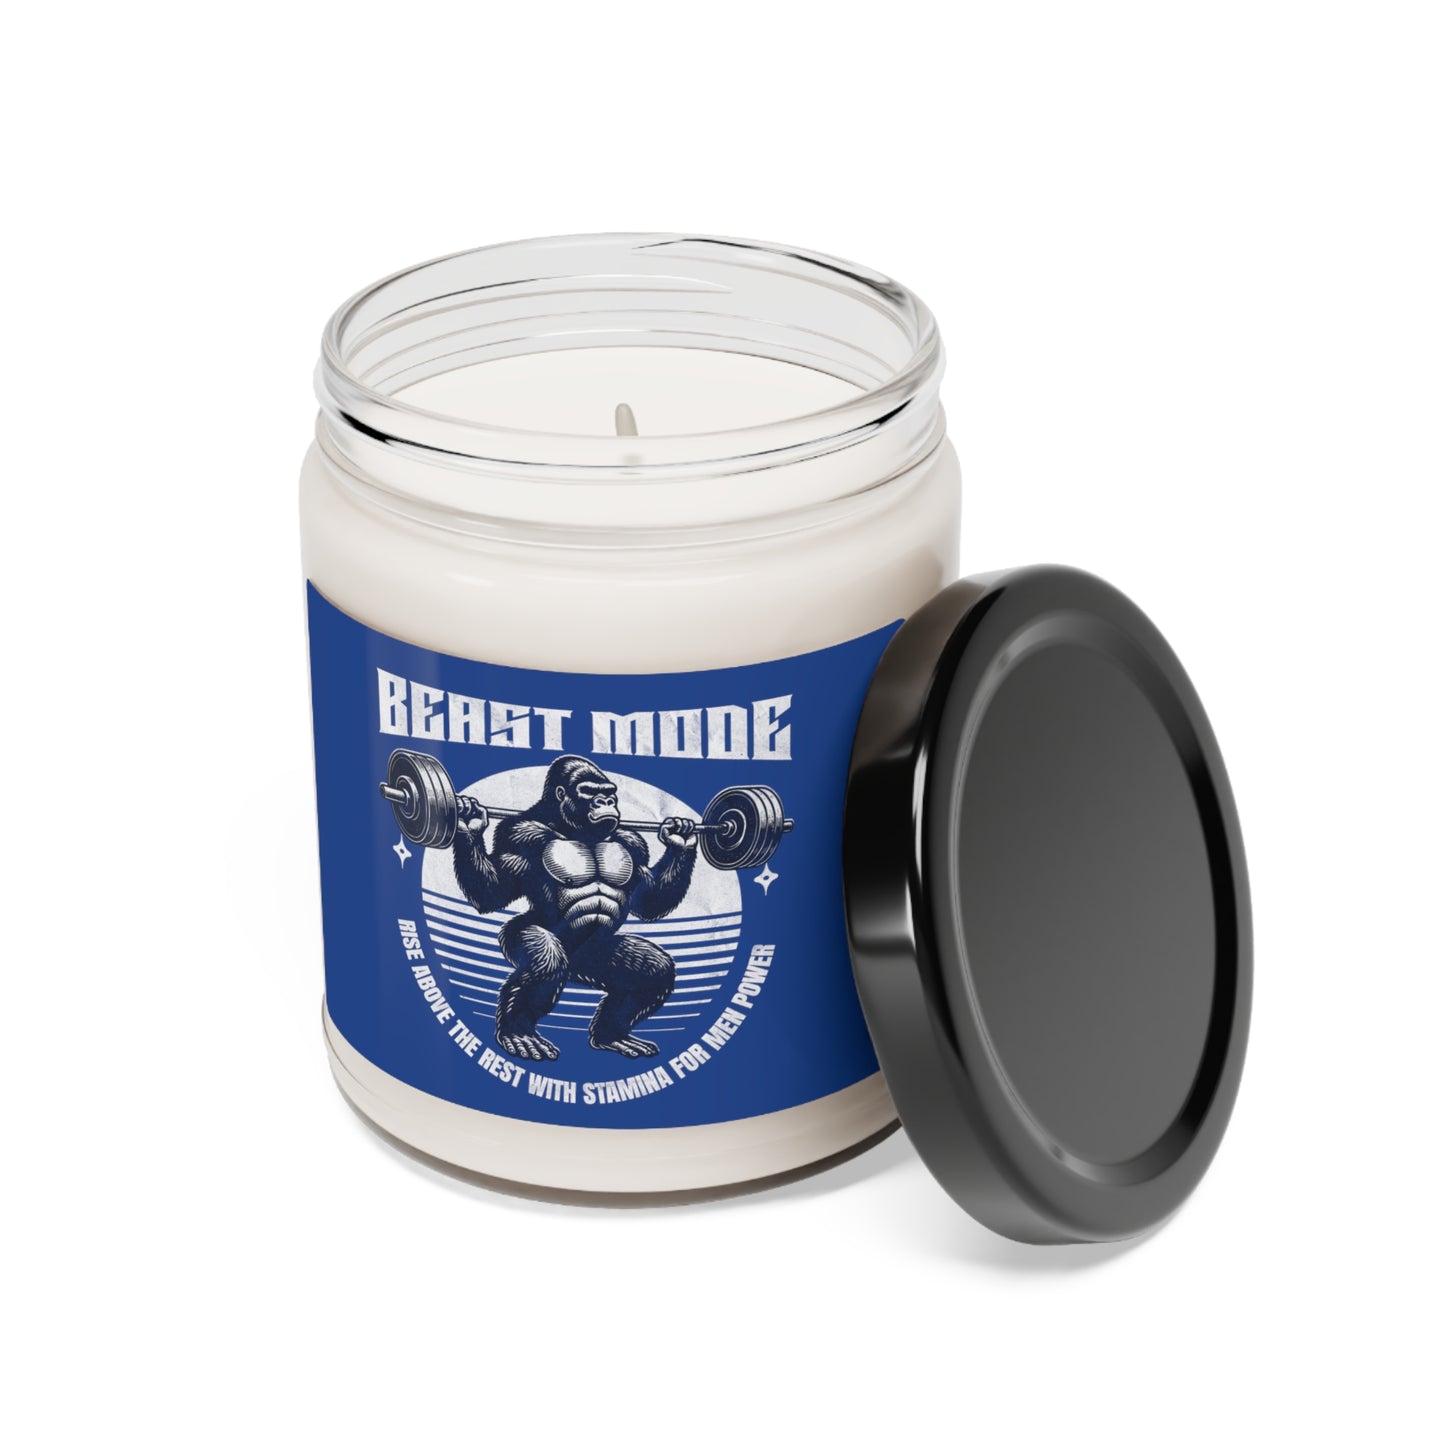 Stamina for Men libido enhancing Beast Mode scented candle product shot with lid off